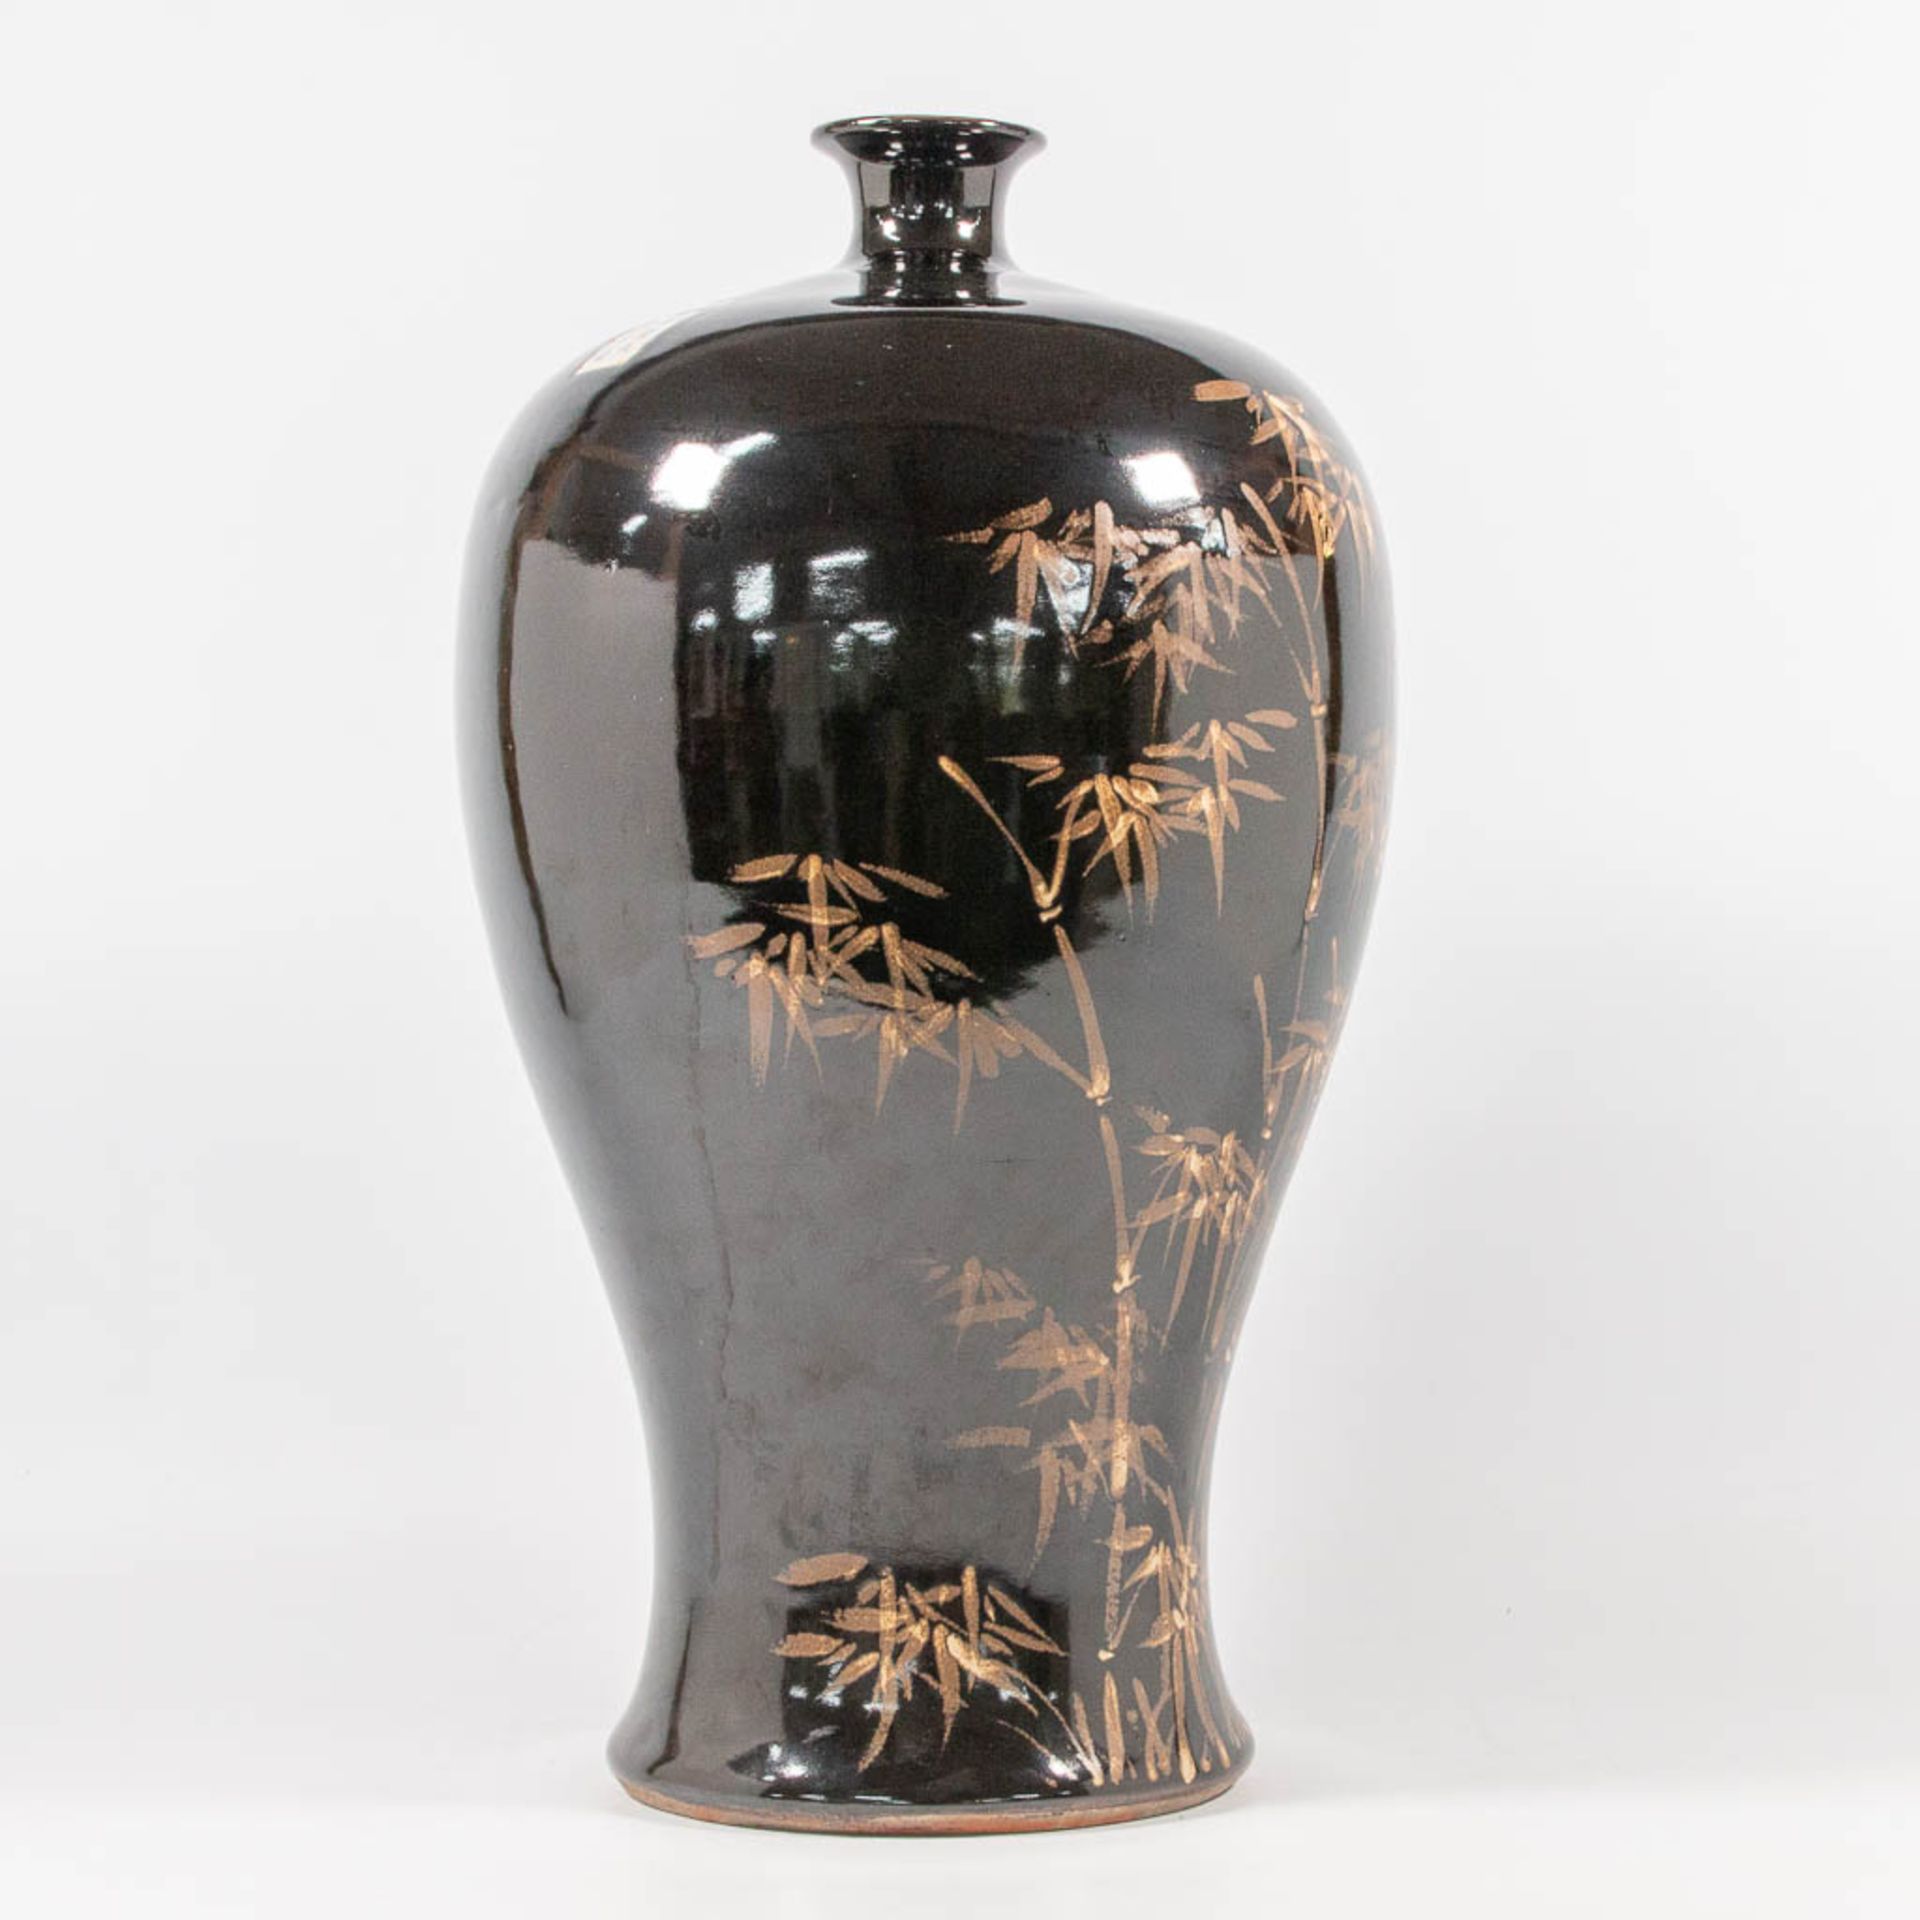 An Asian Vase with black and gold bamboo decor - Image 6 of 14